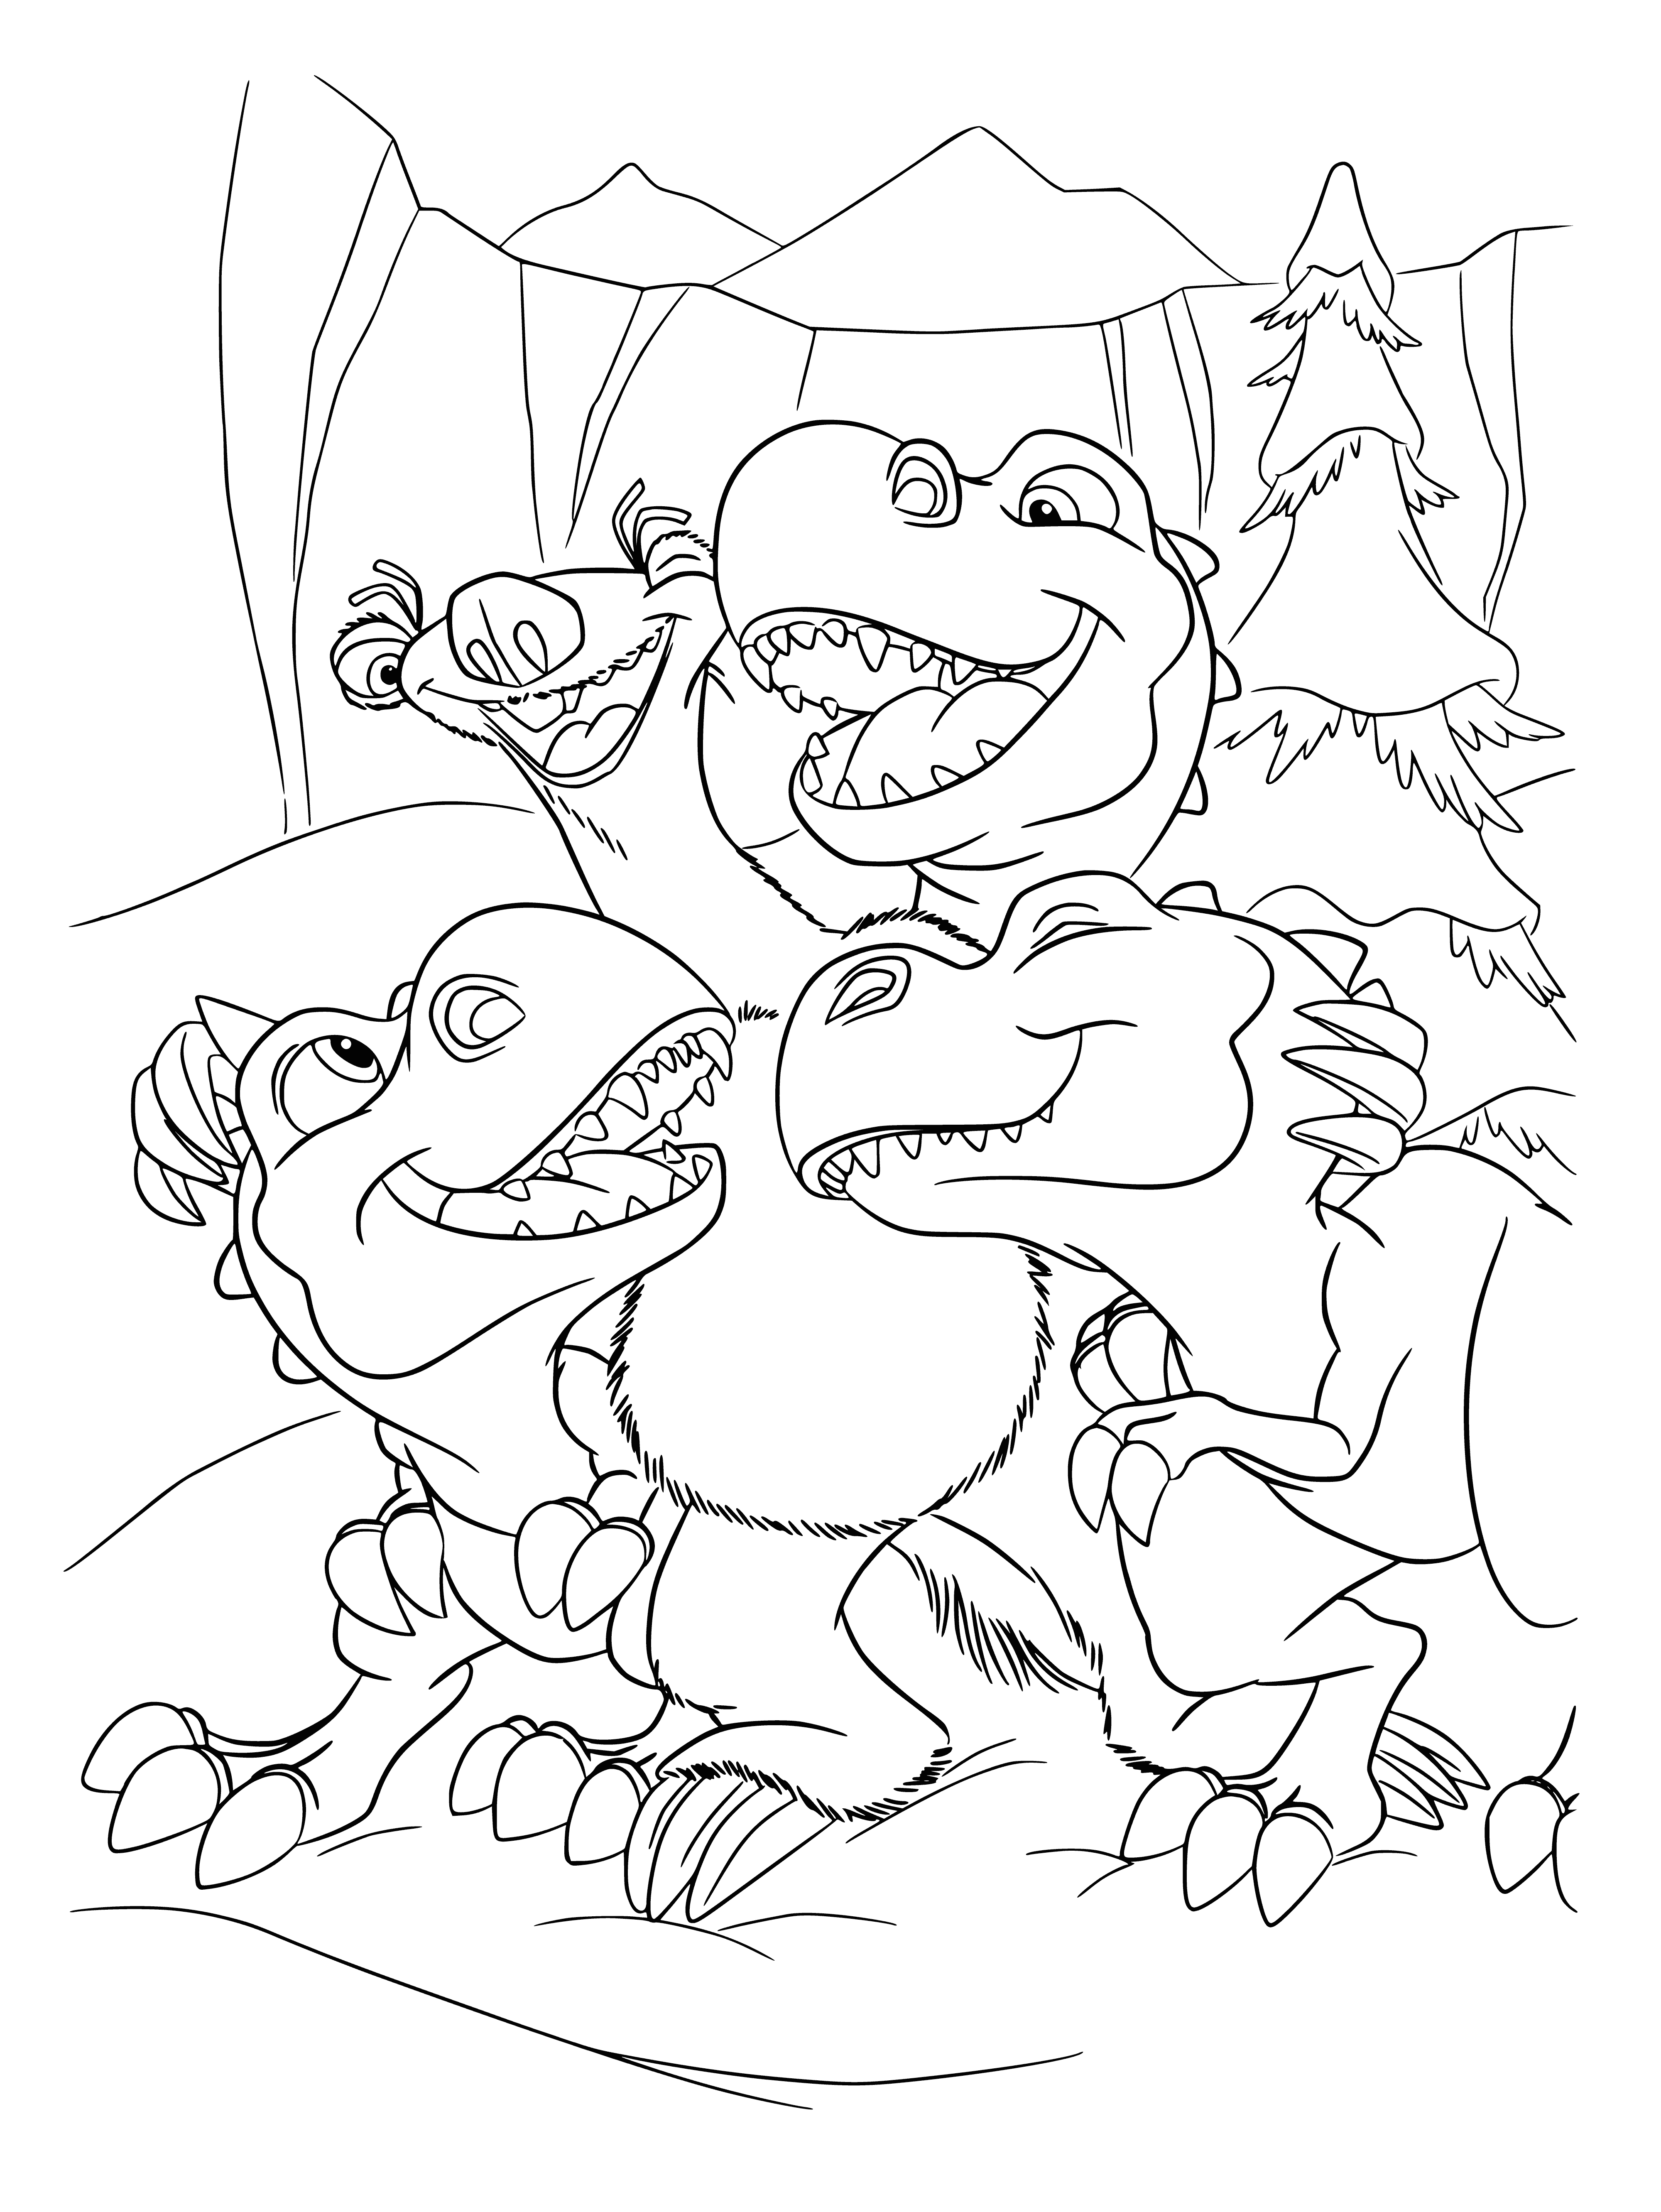 Sid became a mother coloring page